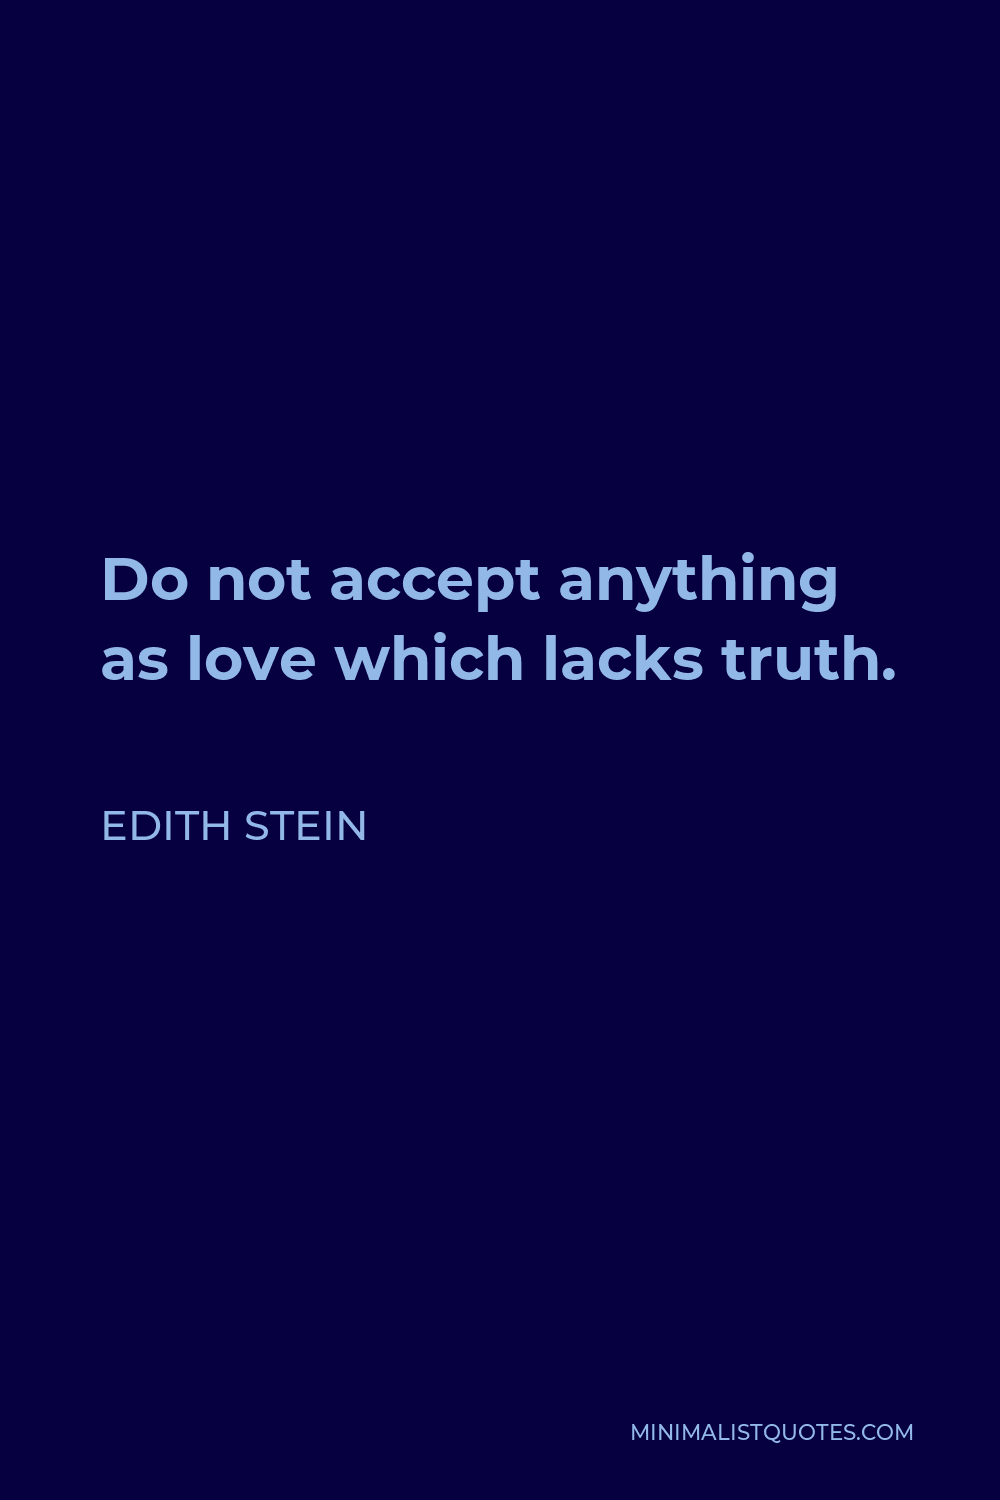 Edith Stein Quote - Do not accept anything as love which lacks truth.